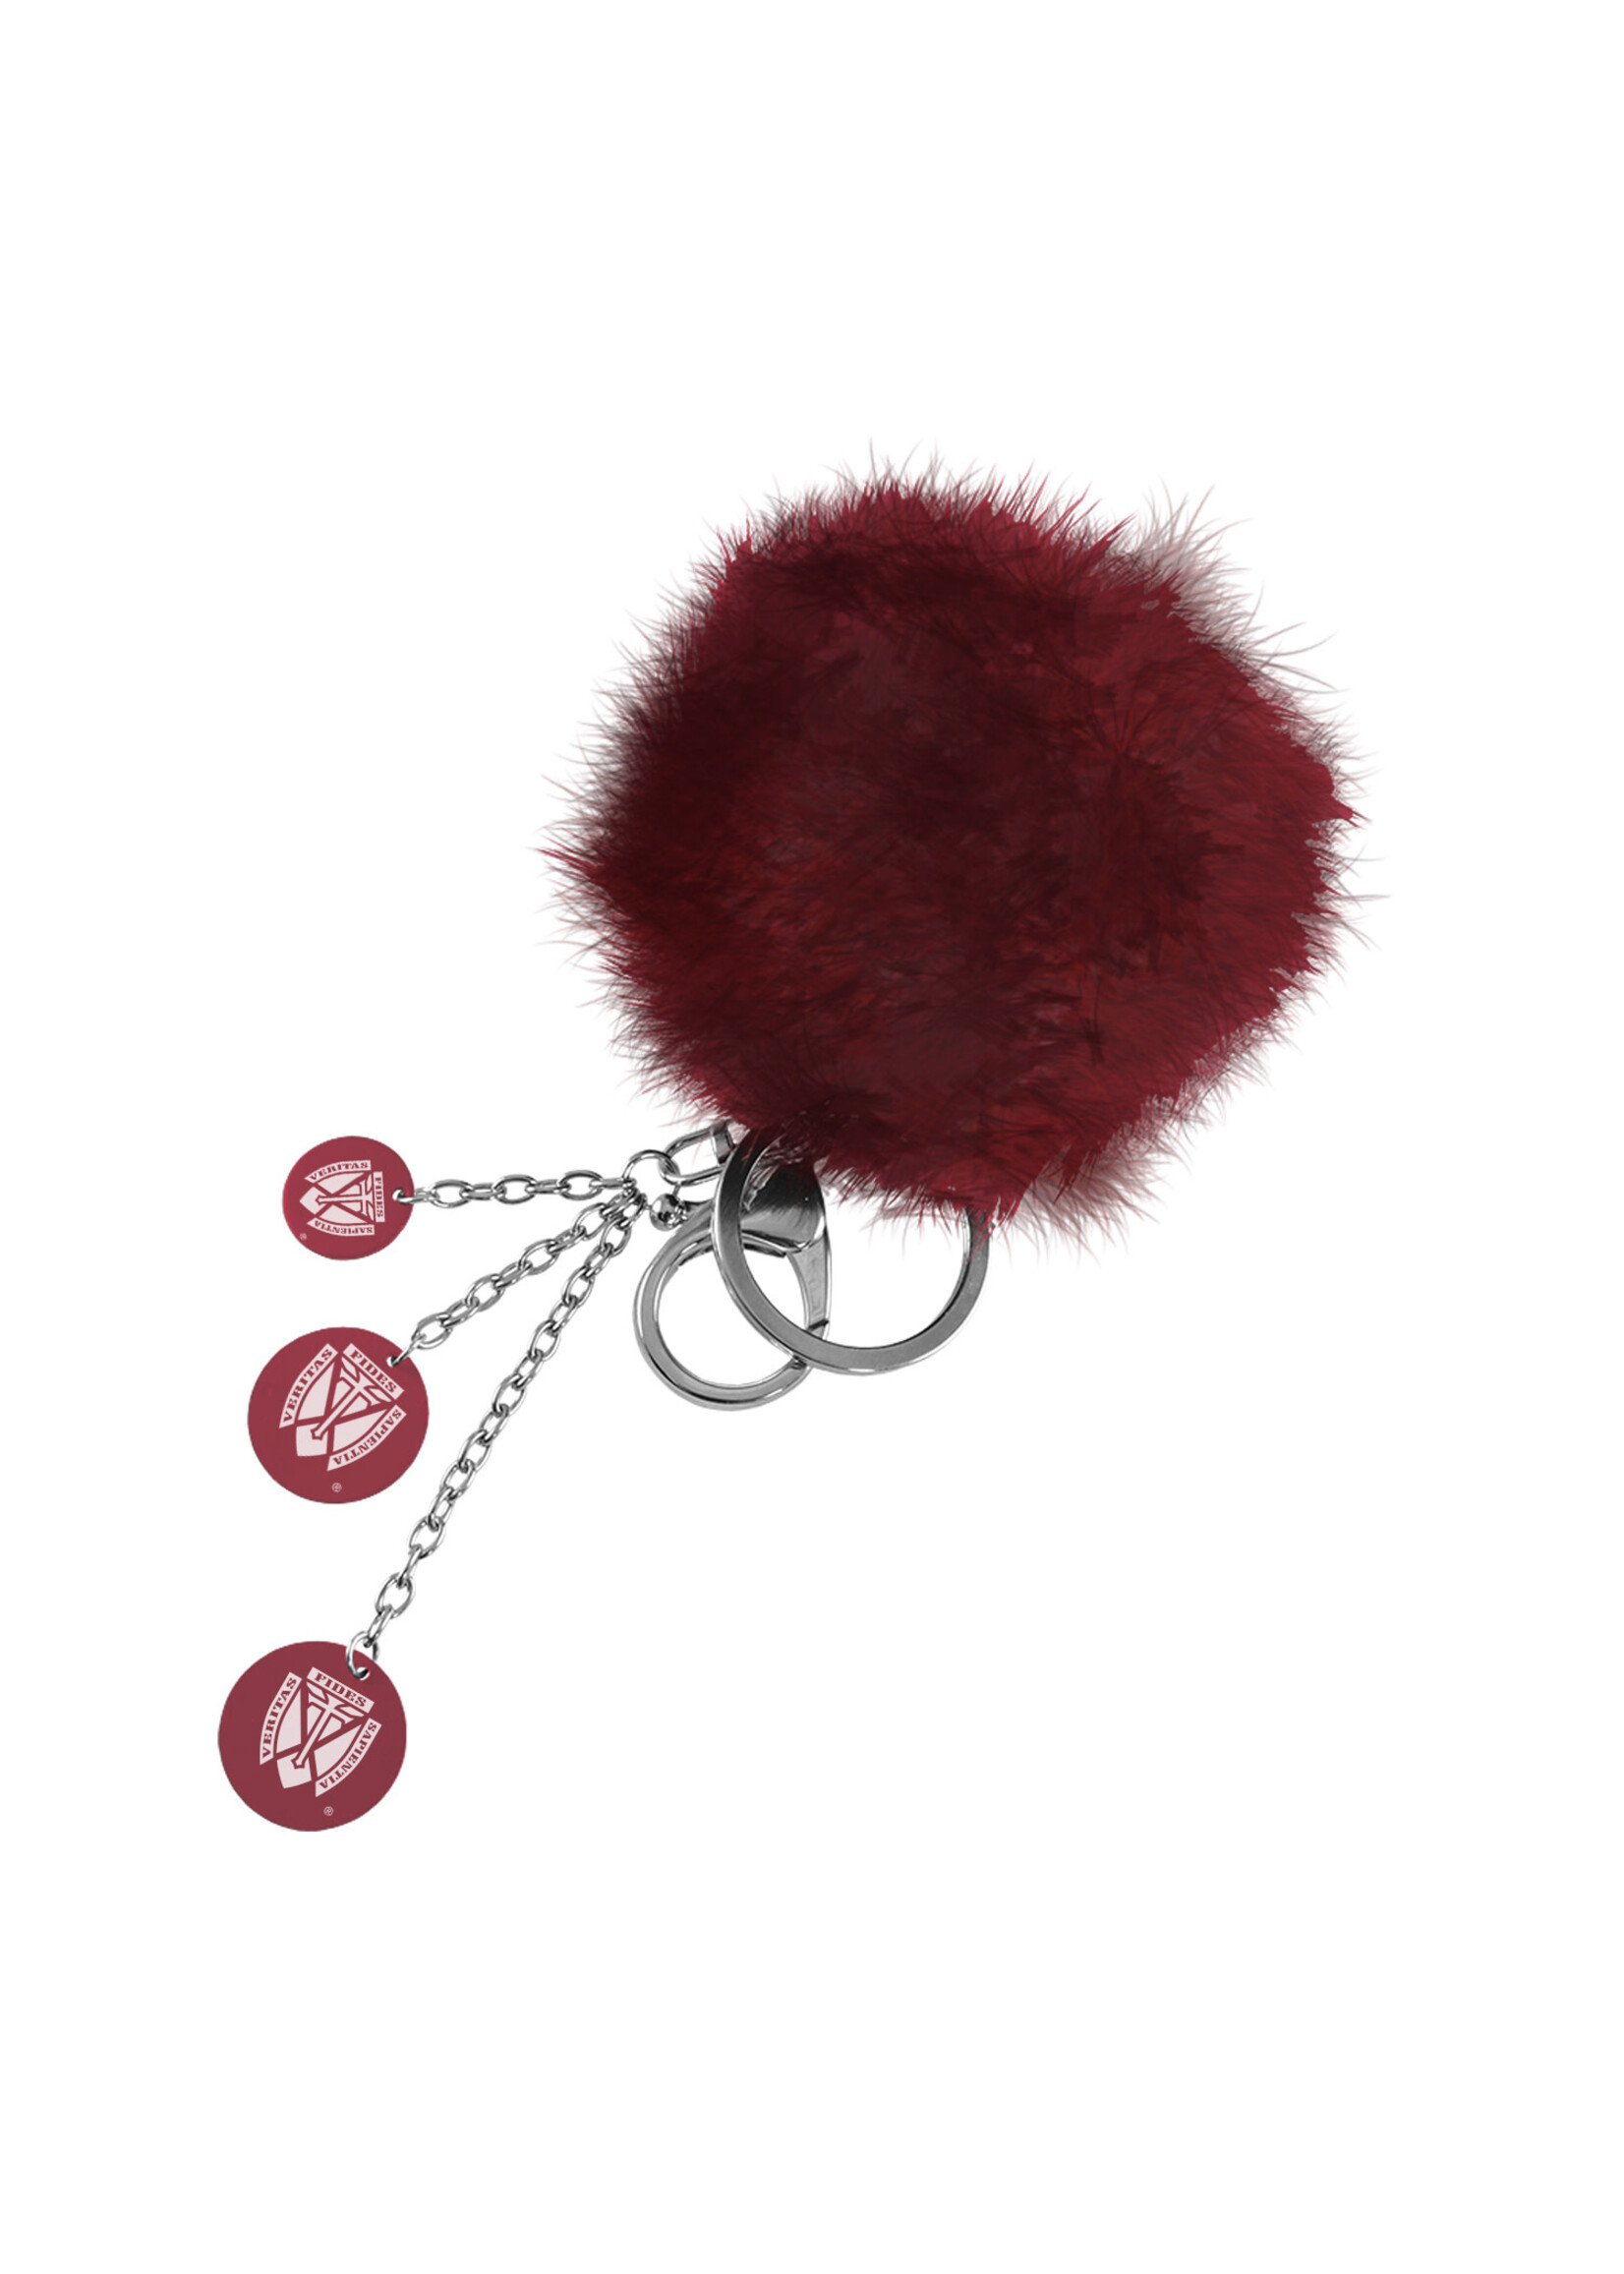 Laser Engraved Gifts Maroon Puffball Keychain